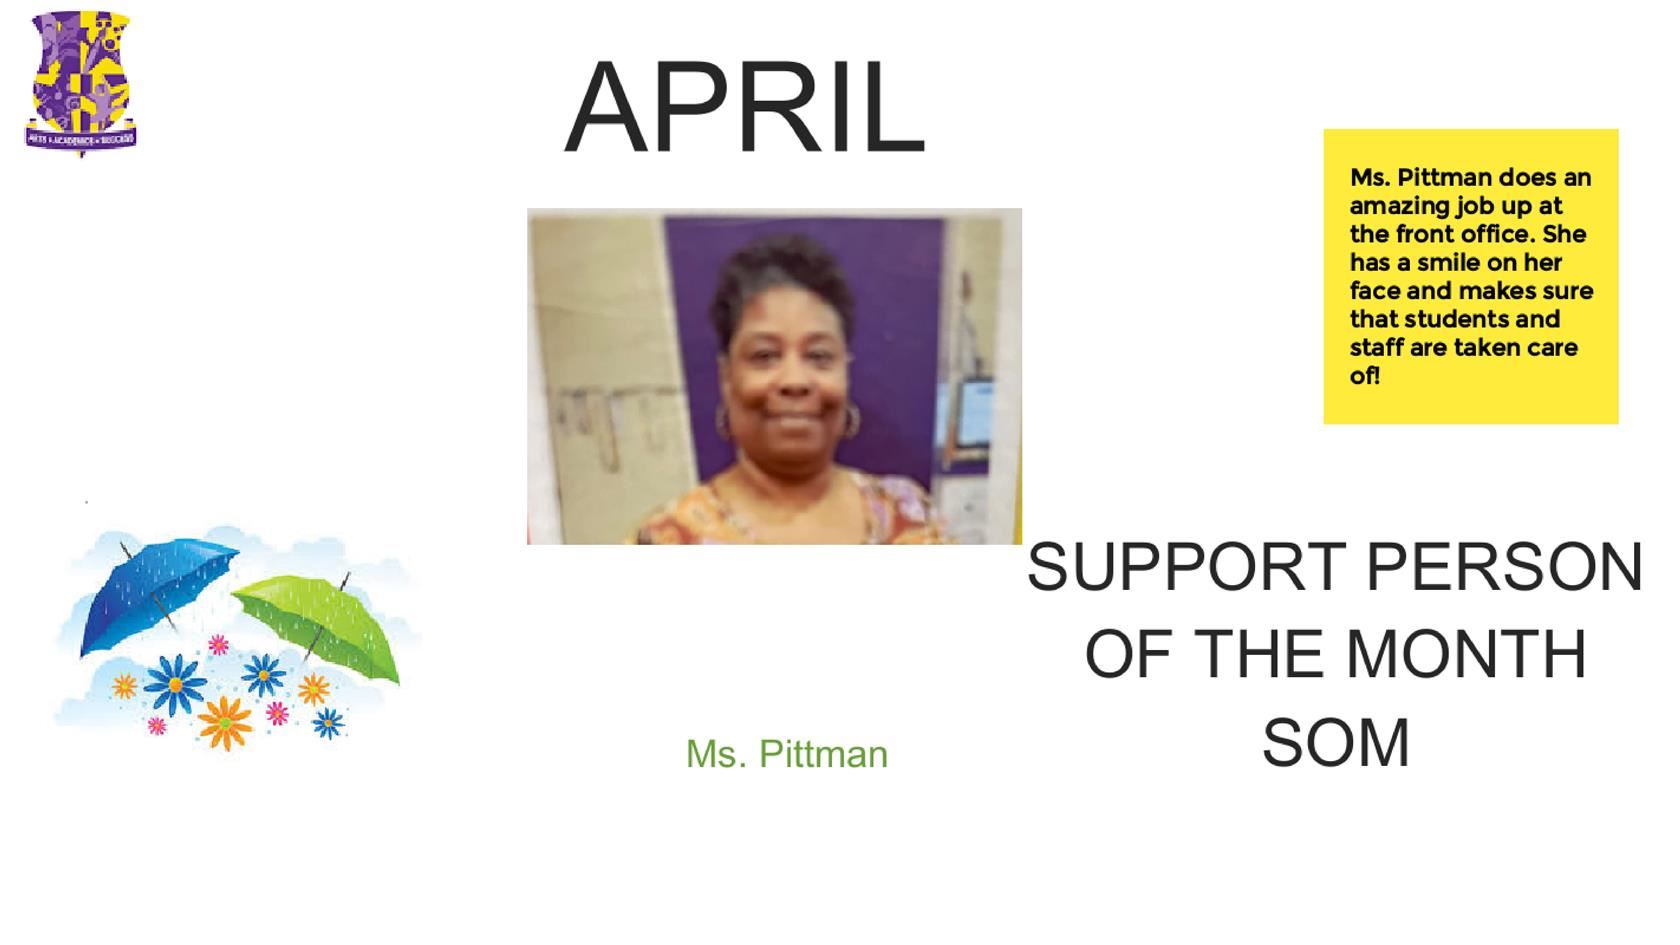  Congrats to Ms. Pittman UPCA's Support Staff of the Month